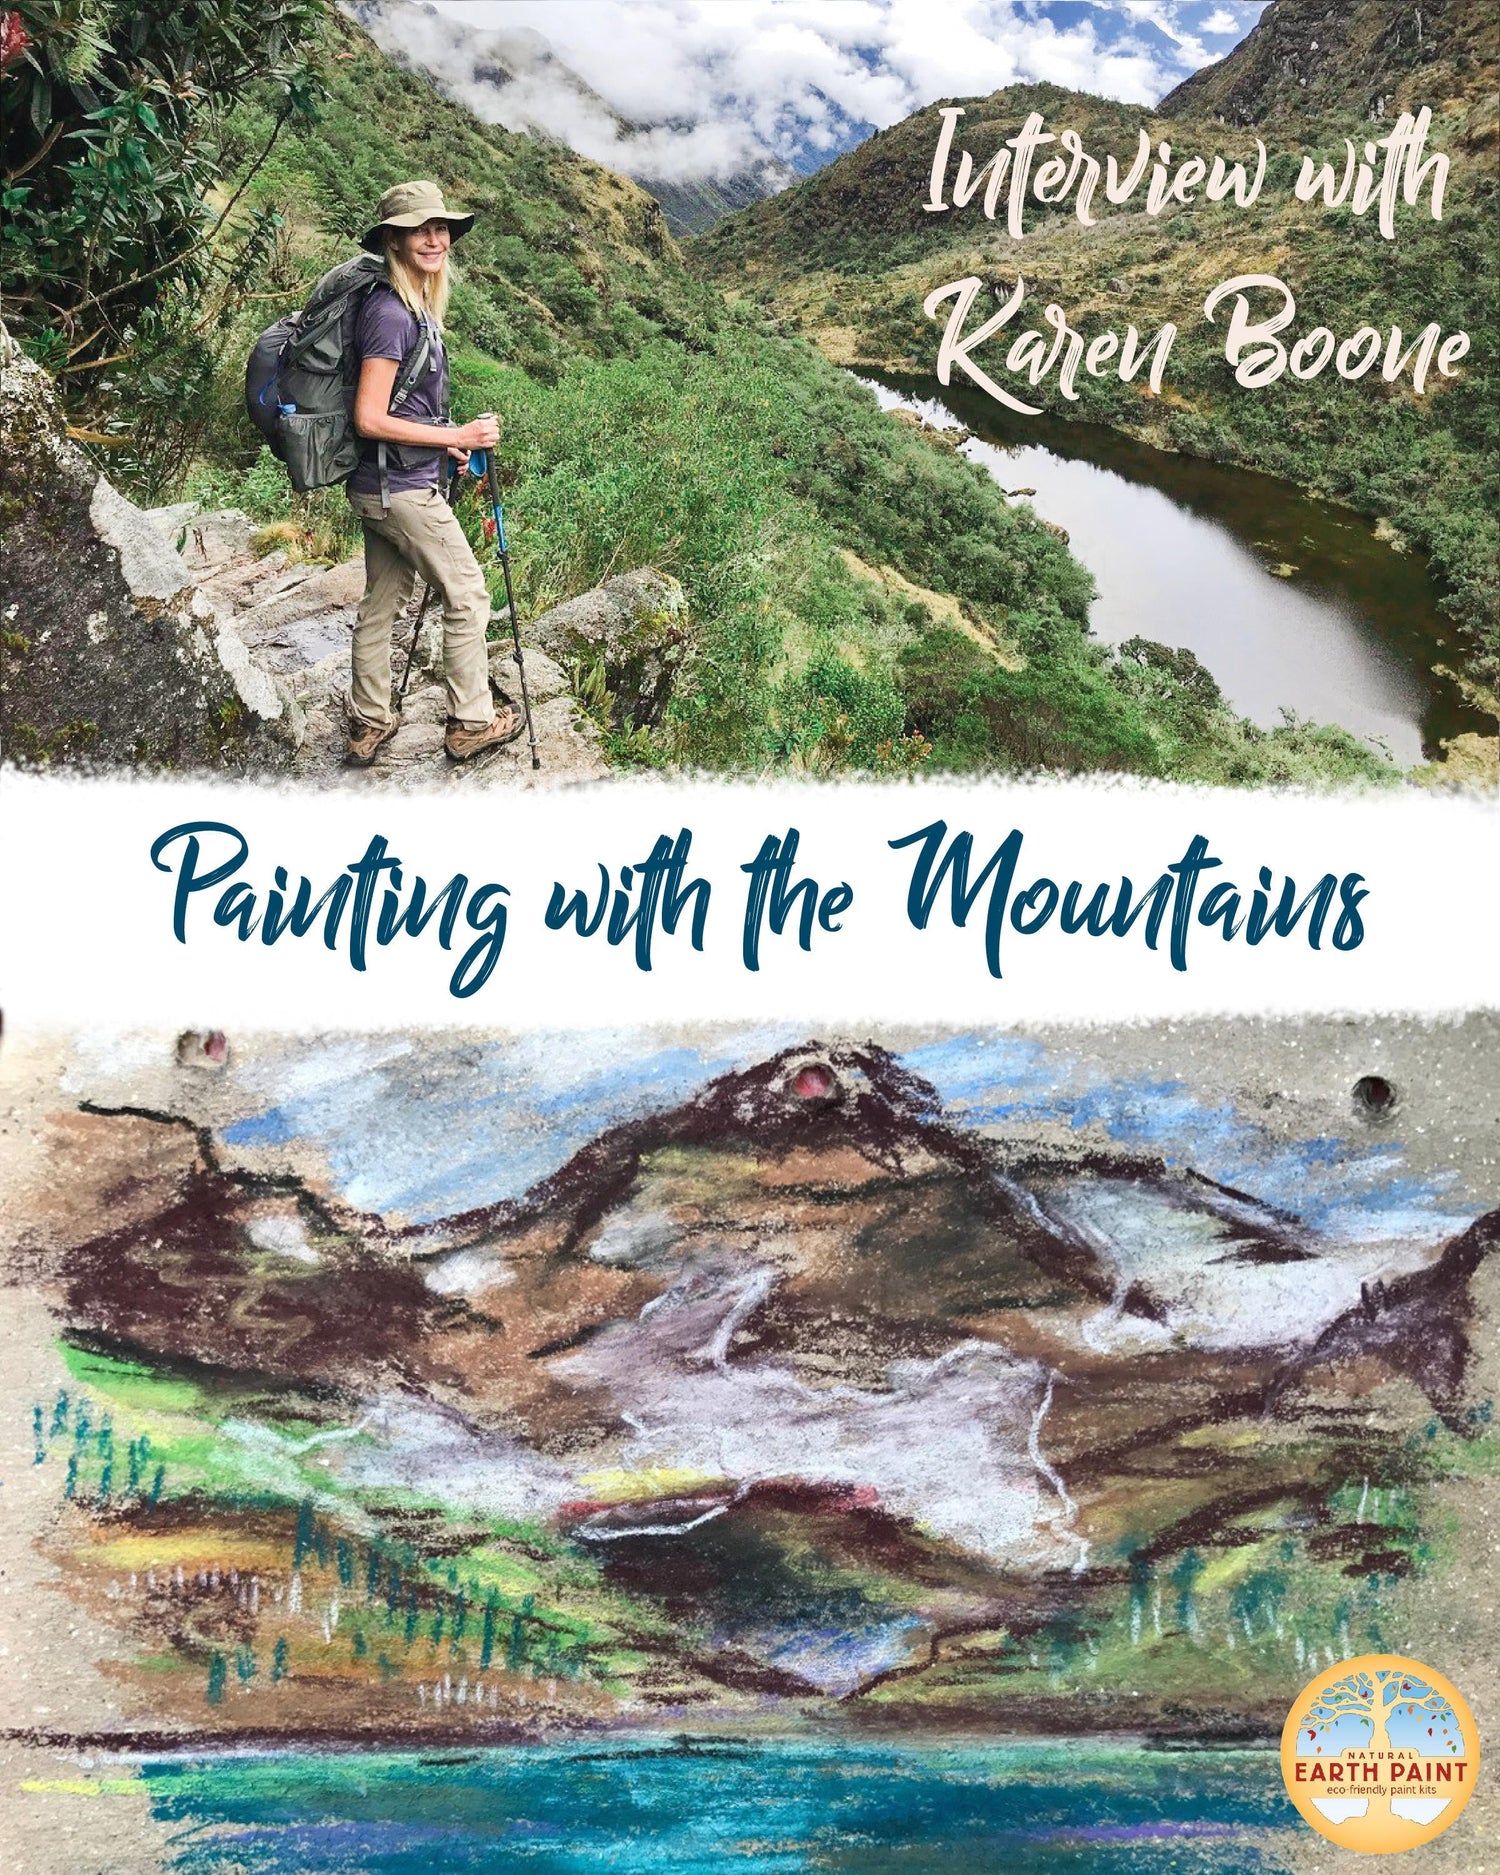 Painting with the Mountains with Karen Boon